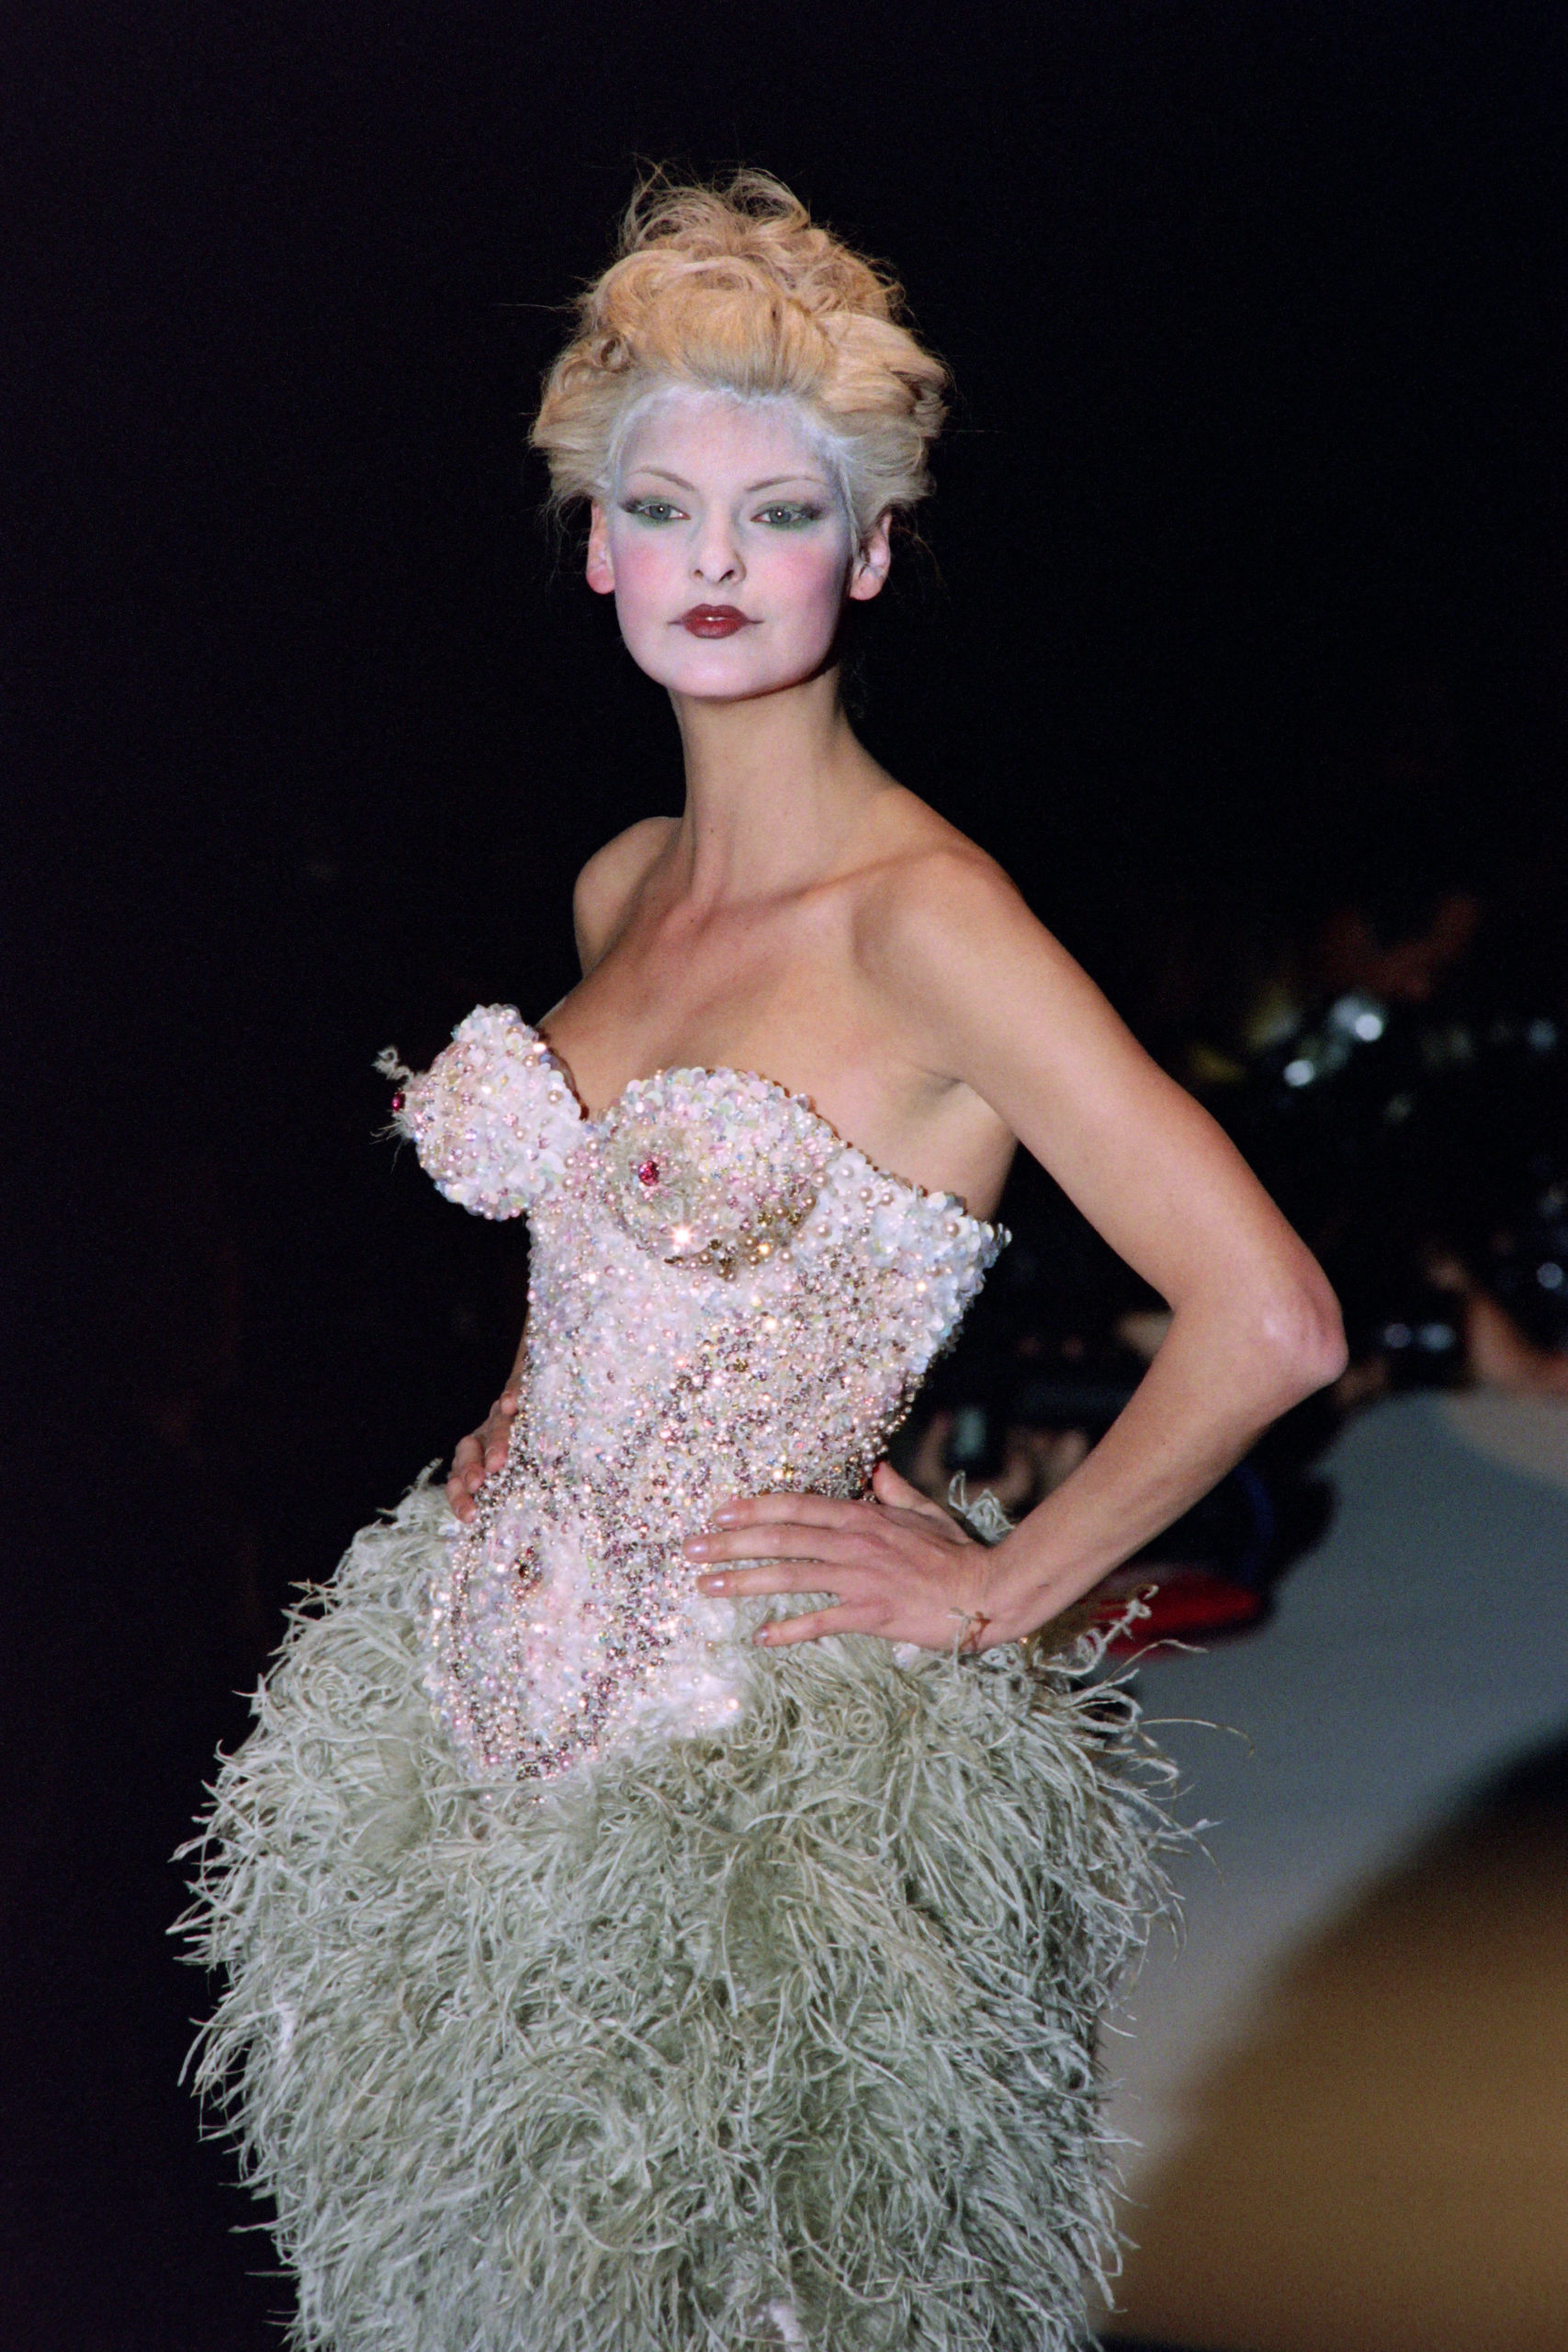 In this file photo taken on March 18, 1995, Canadian model Linda Evangelista displays a creation at the Louvre Carrousel in Paris. - Former supermodel Linda Evangelista says she has been permanently disfigured by a fat-reduction cosmetic procedure that backfired and caused her to look bloated and unrecognizable. Evangelista, 56, said she underwent "CoolSculpting" five years ago and that it had the rare side effect of causing her fat cells to increase rather than decrease.